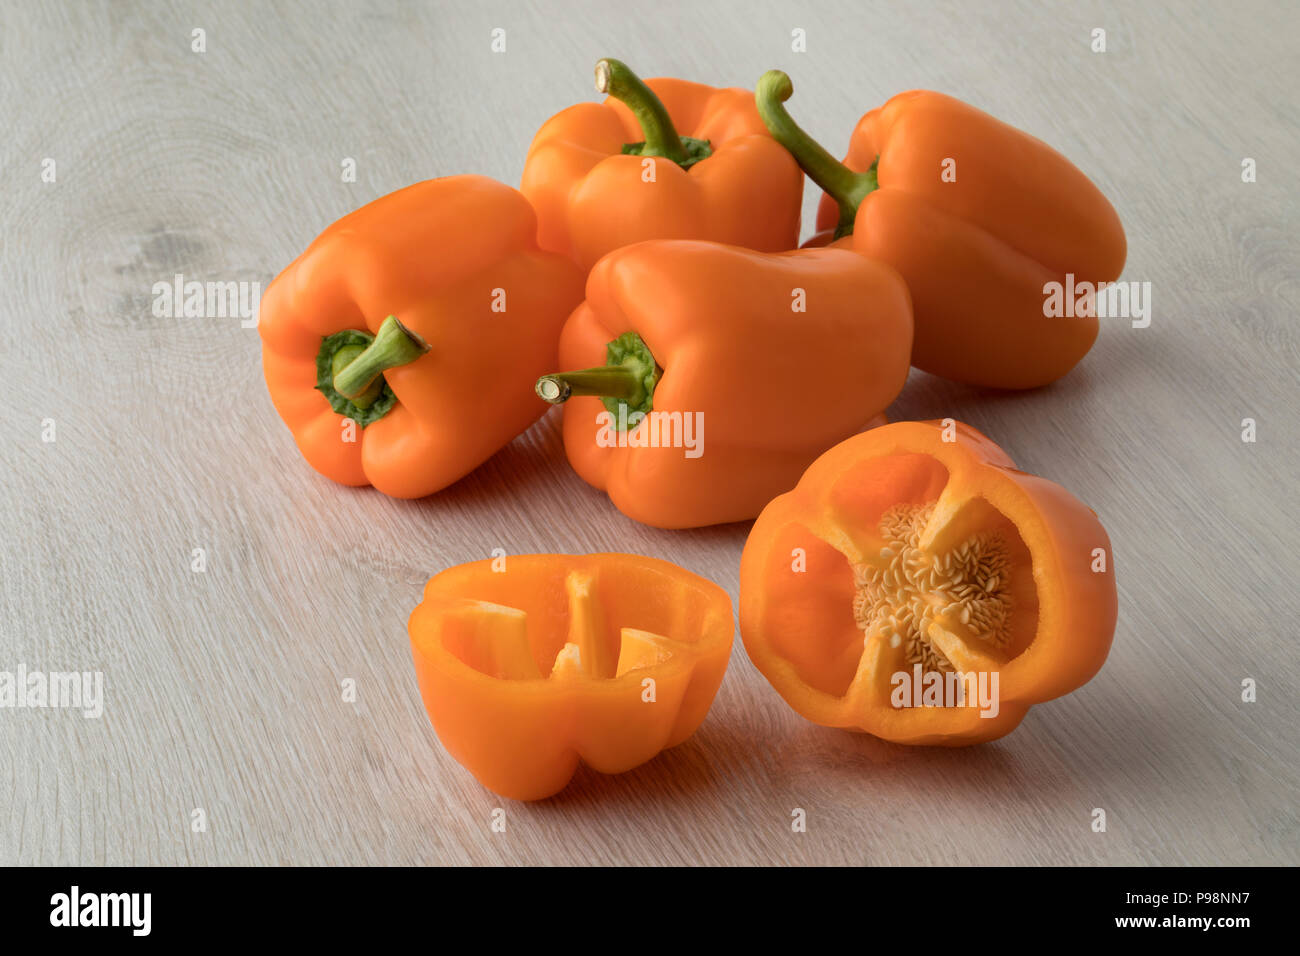 Fresh raw whole and halved sweet orange bell peppers Stock Photo